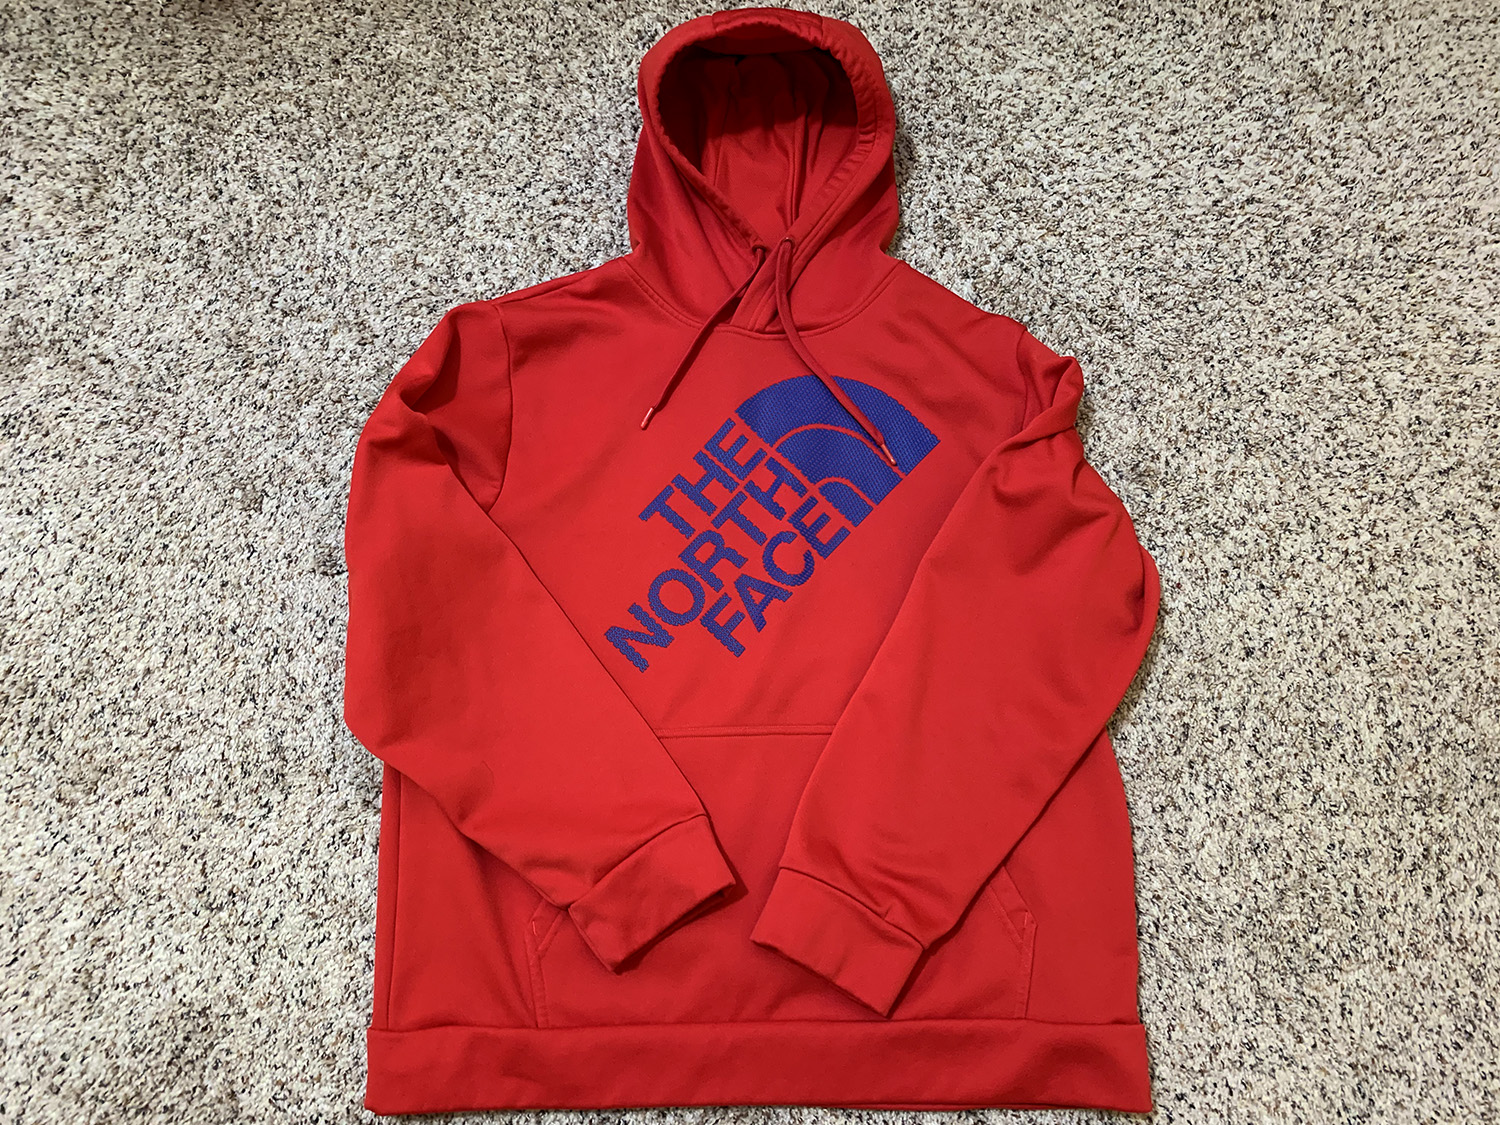 The North Face Mens Logo Hooded Sweatshirt Size XL at The MenuGem Web Store